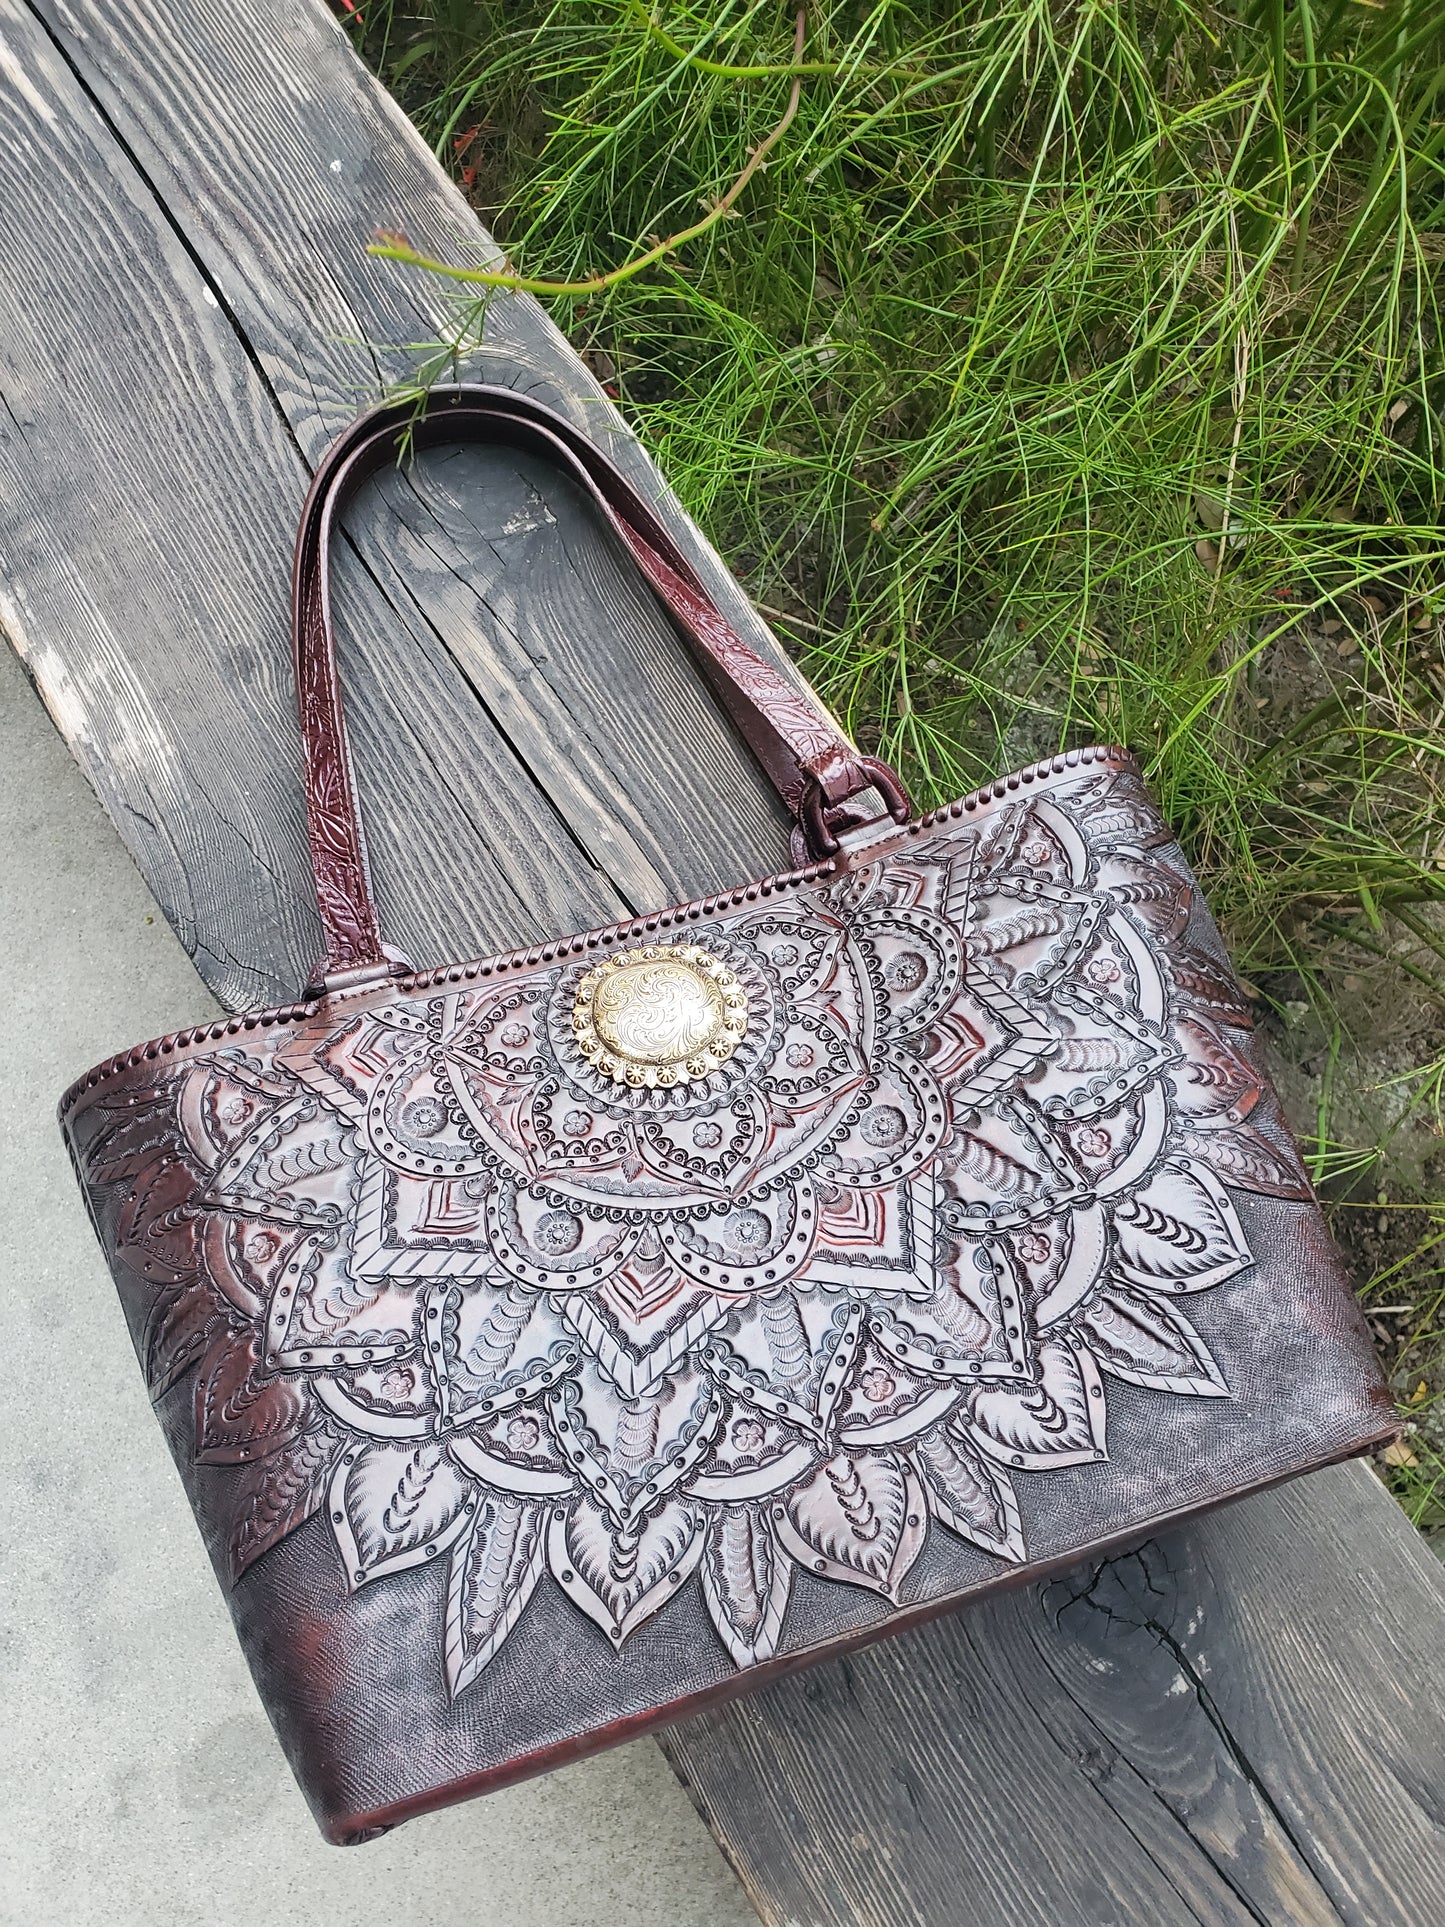 Hand Made Leather Tote Bag "MIA" by MIOHERMOSA Brown Mia Swirls Top